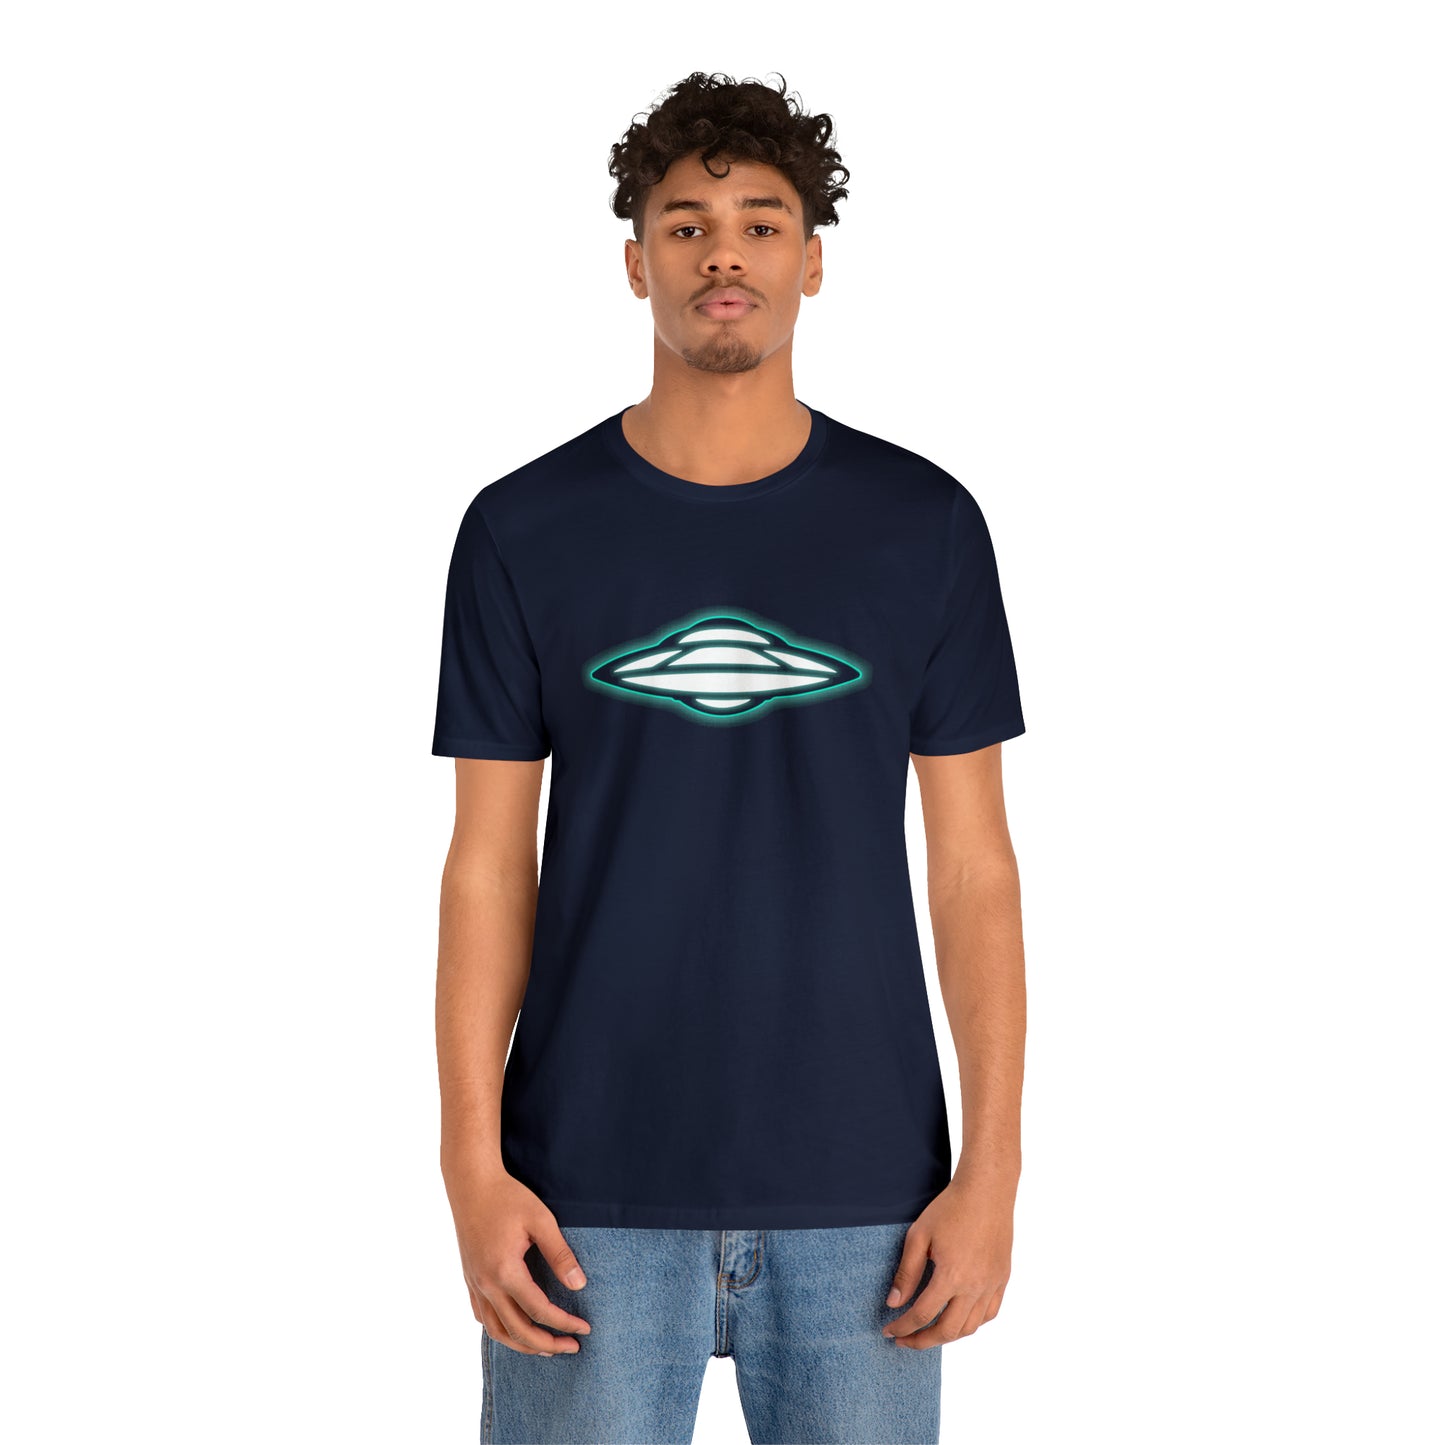 Navy T-Shirt with glowing green ufo design. Taken from the TEQNEON Spacecraft collection